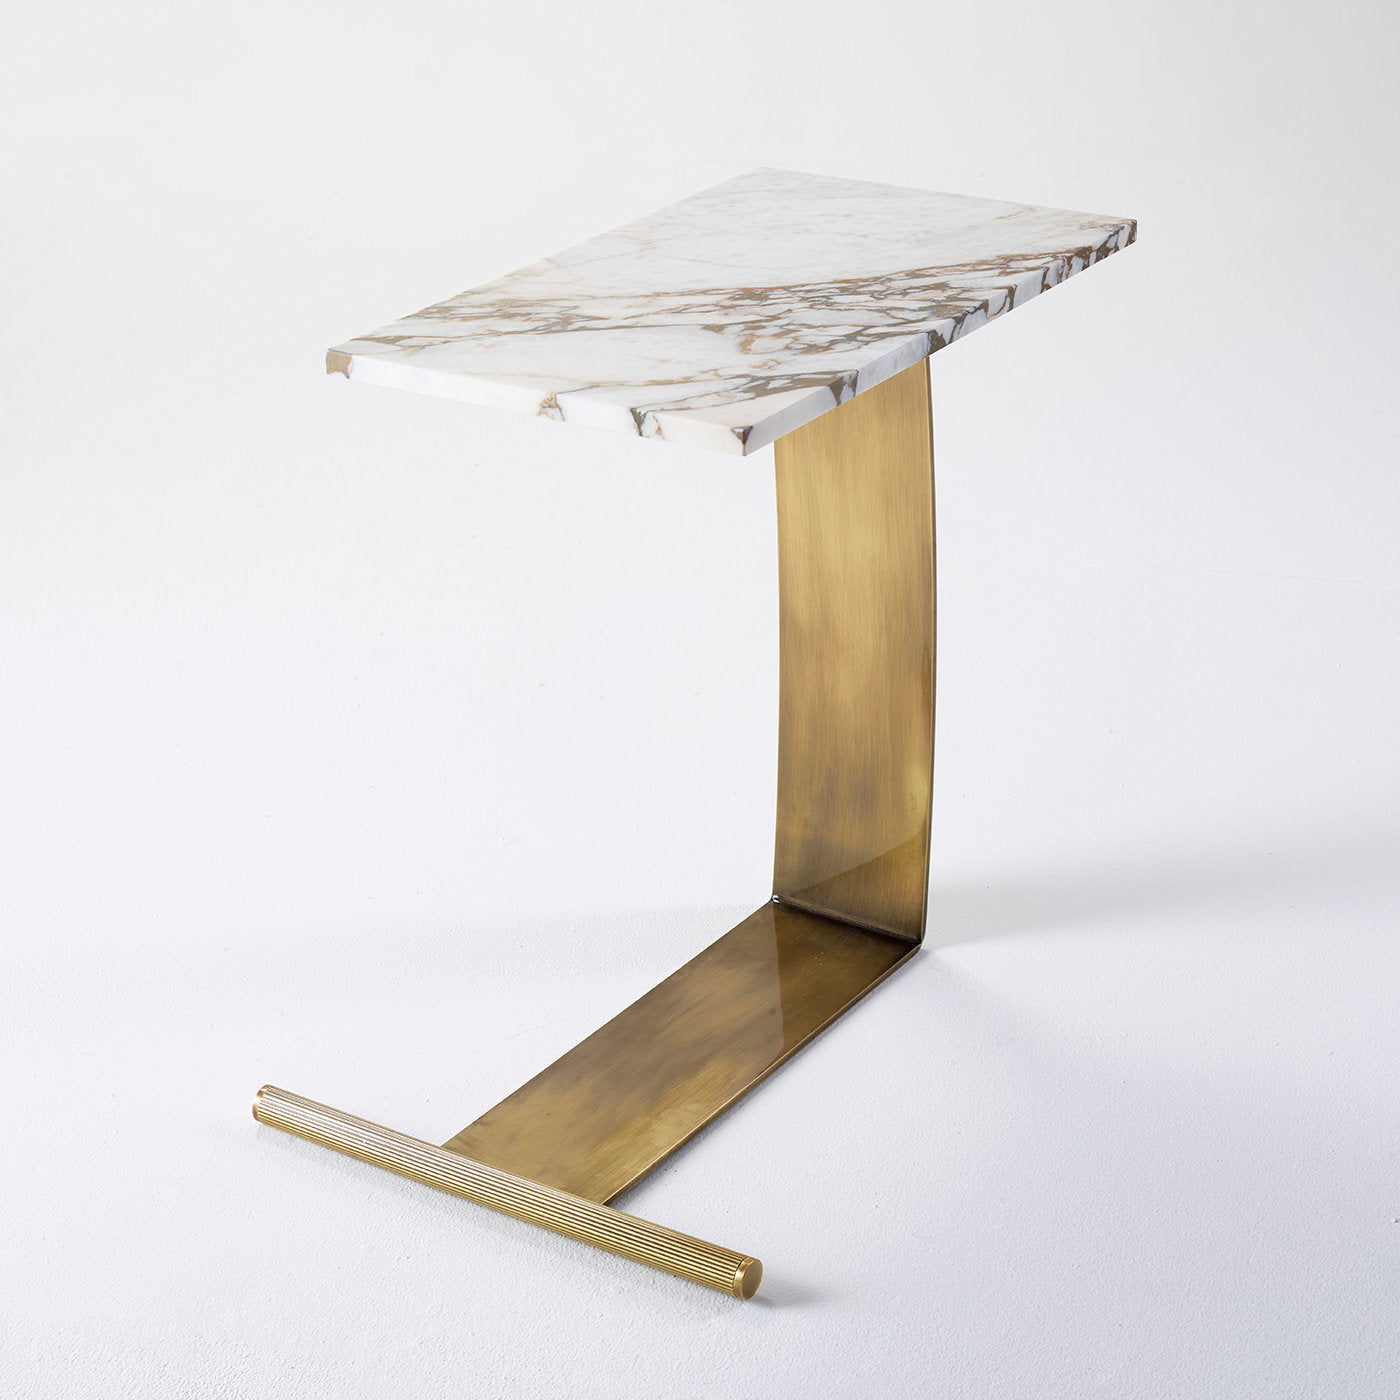 Guy Marble Table - Alternative view 4